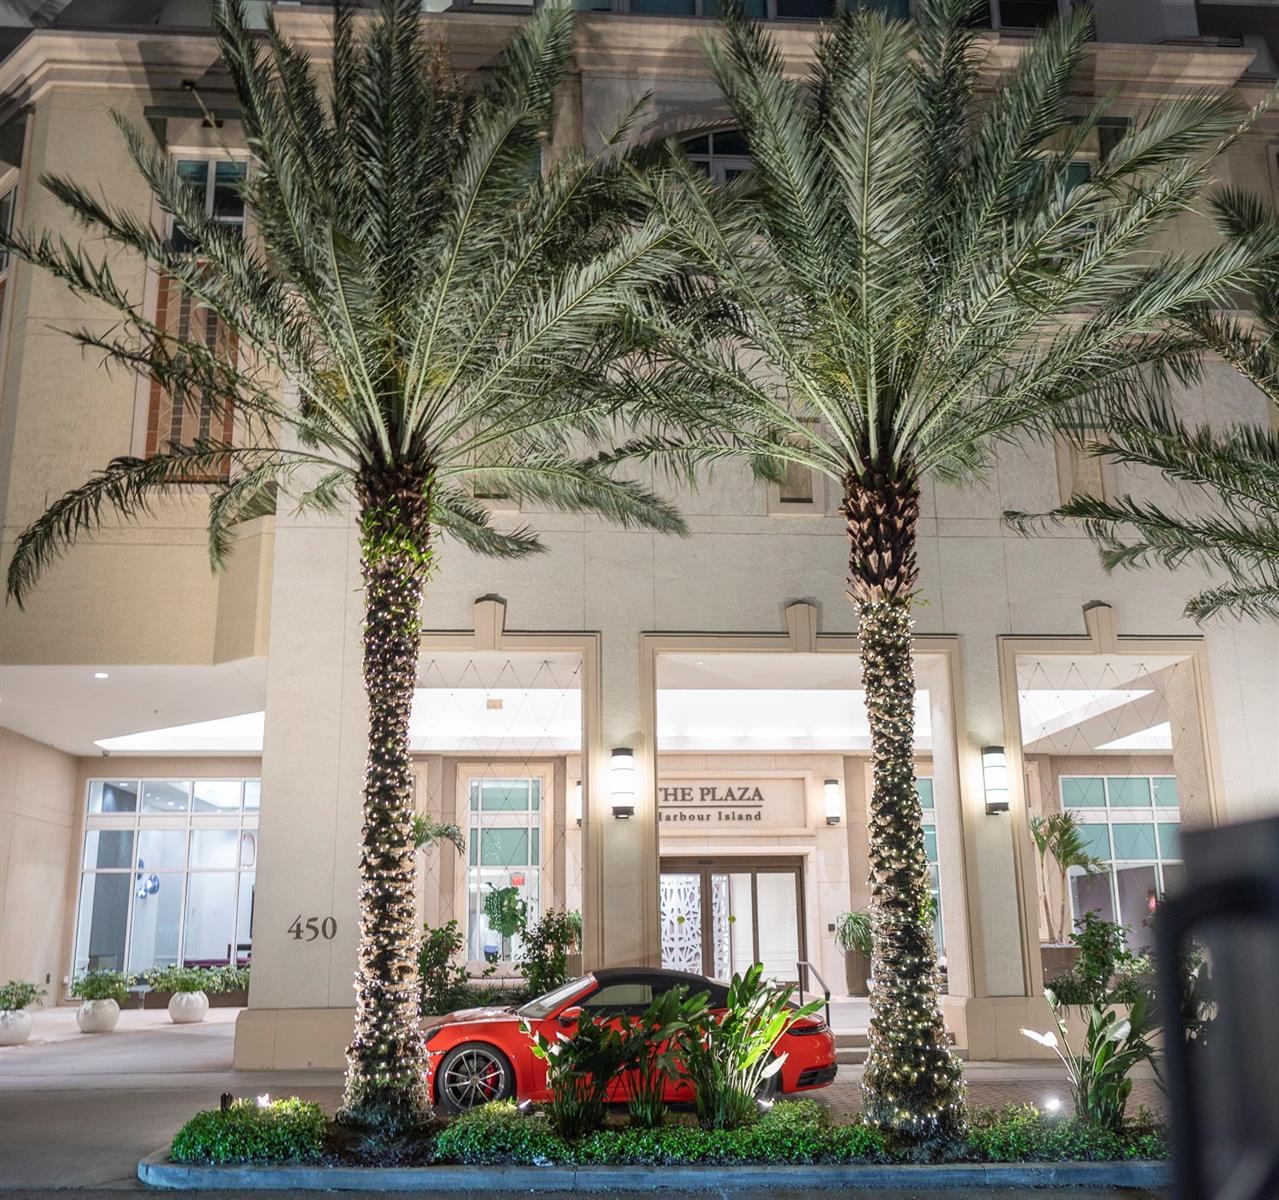 Enjoy the convenience of valet service right at the entrance.